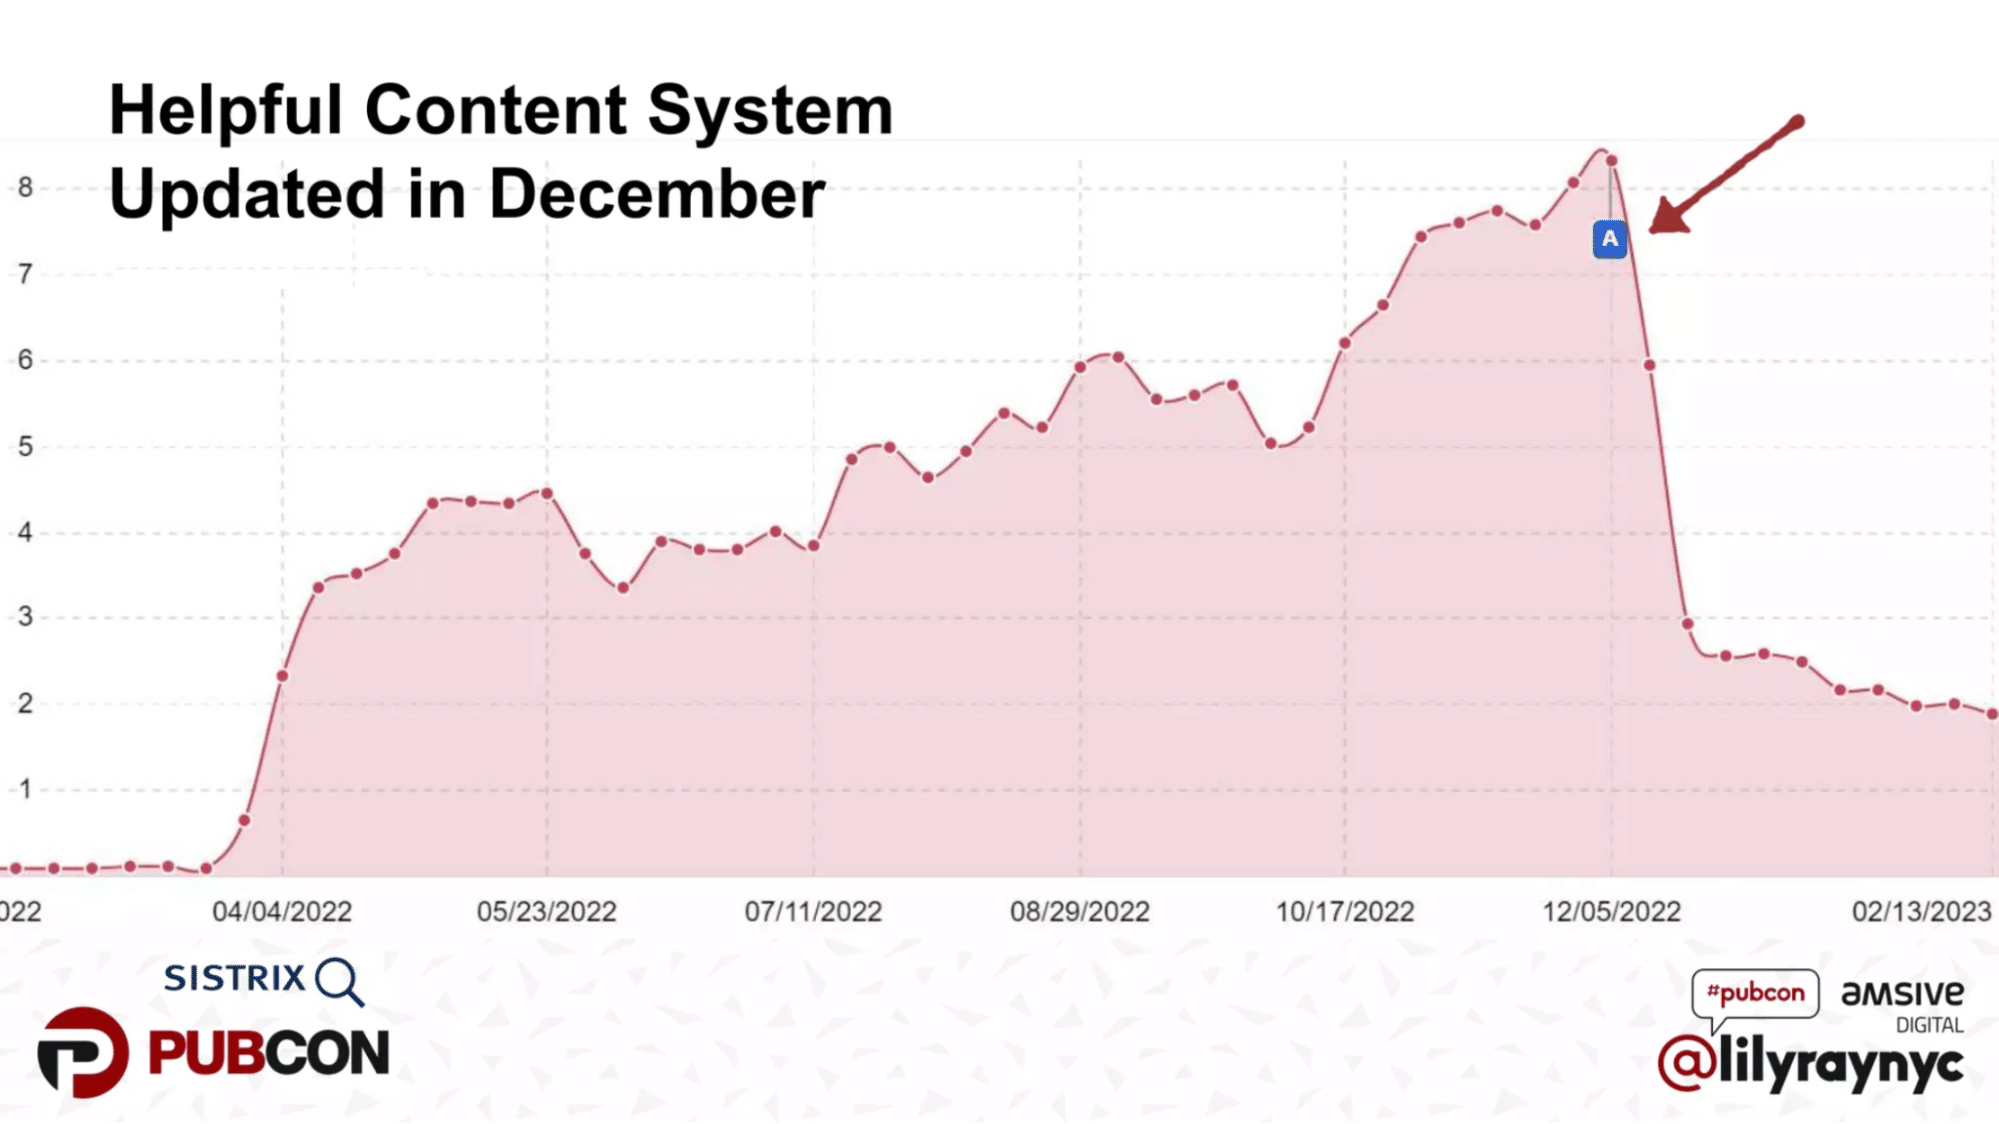 Graph showing the delayed impact of the helpful content system from when it was announced in August vs. when major shifts started showing up in December.